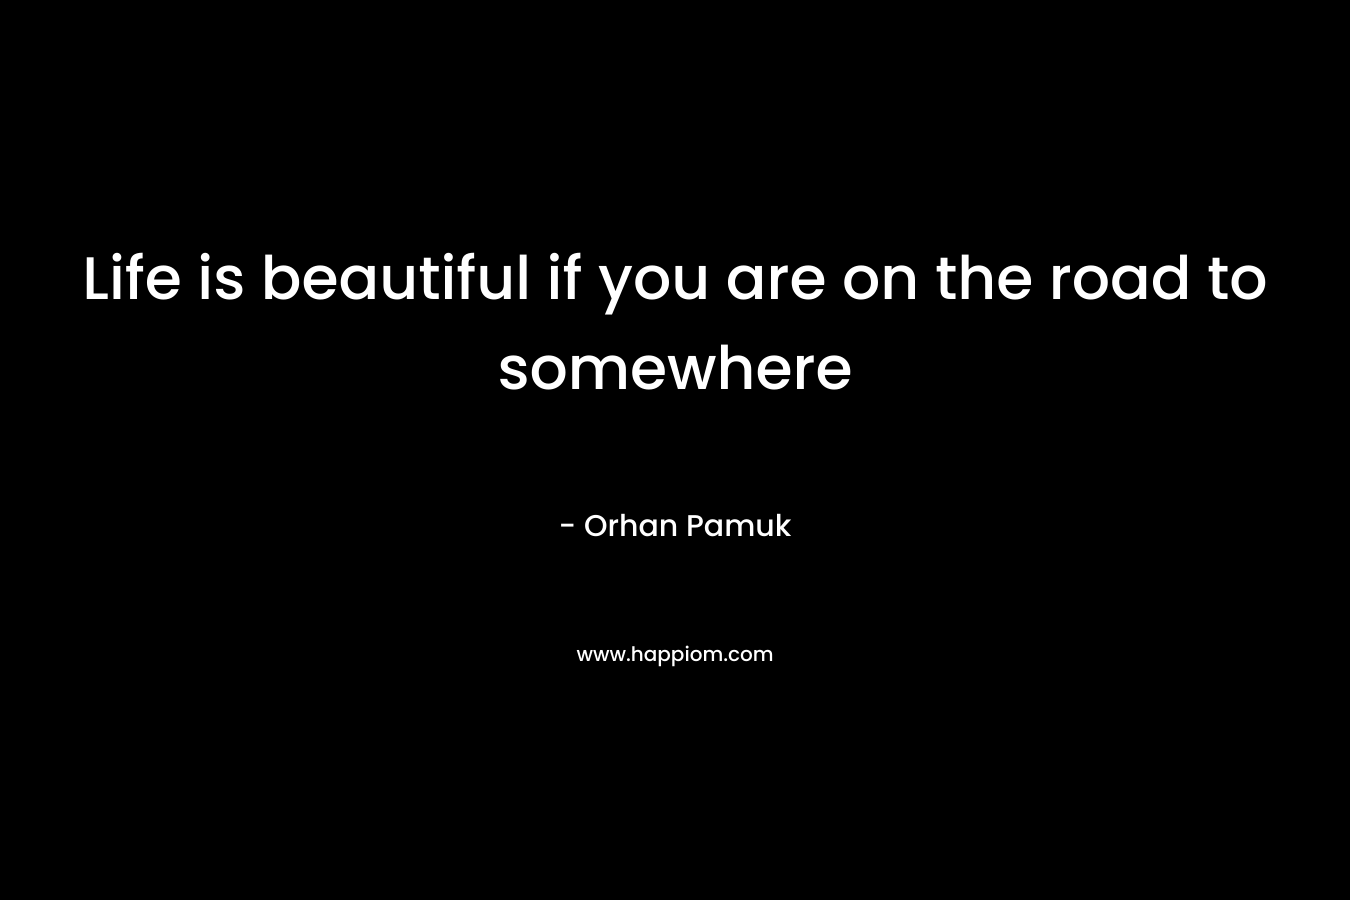 Life is beautiful if you are on the road to somewhere – Orhan Pamuk